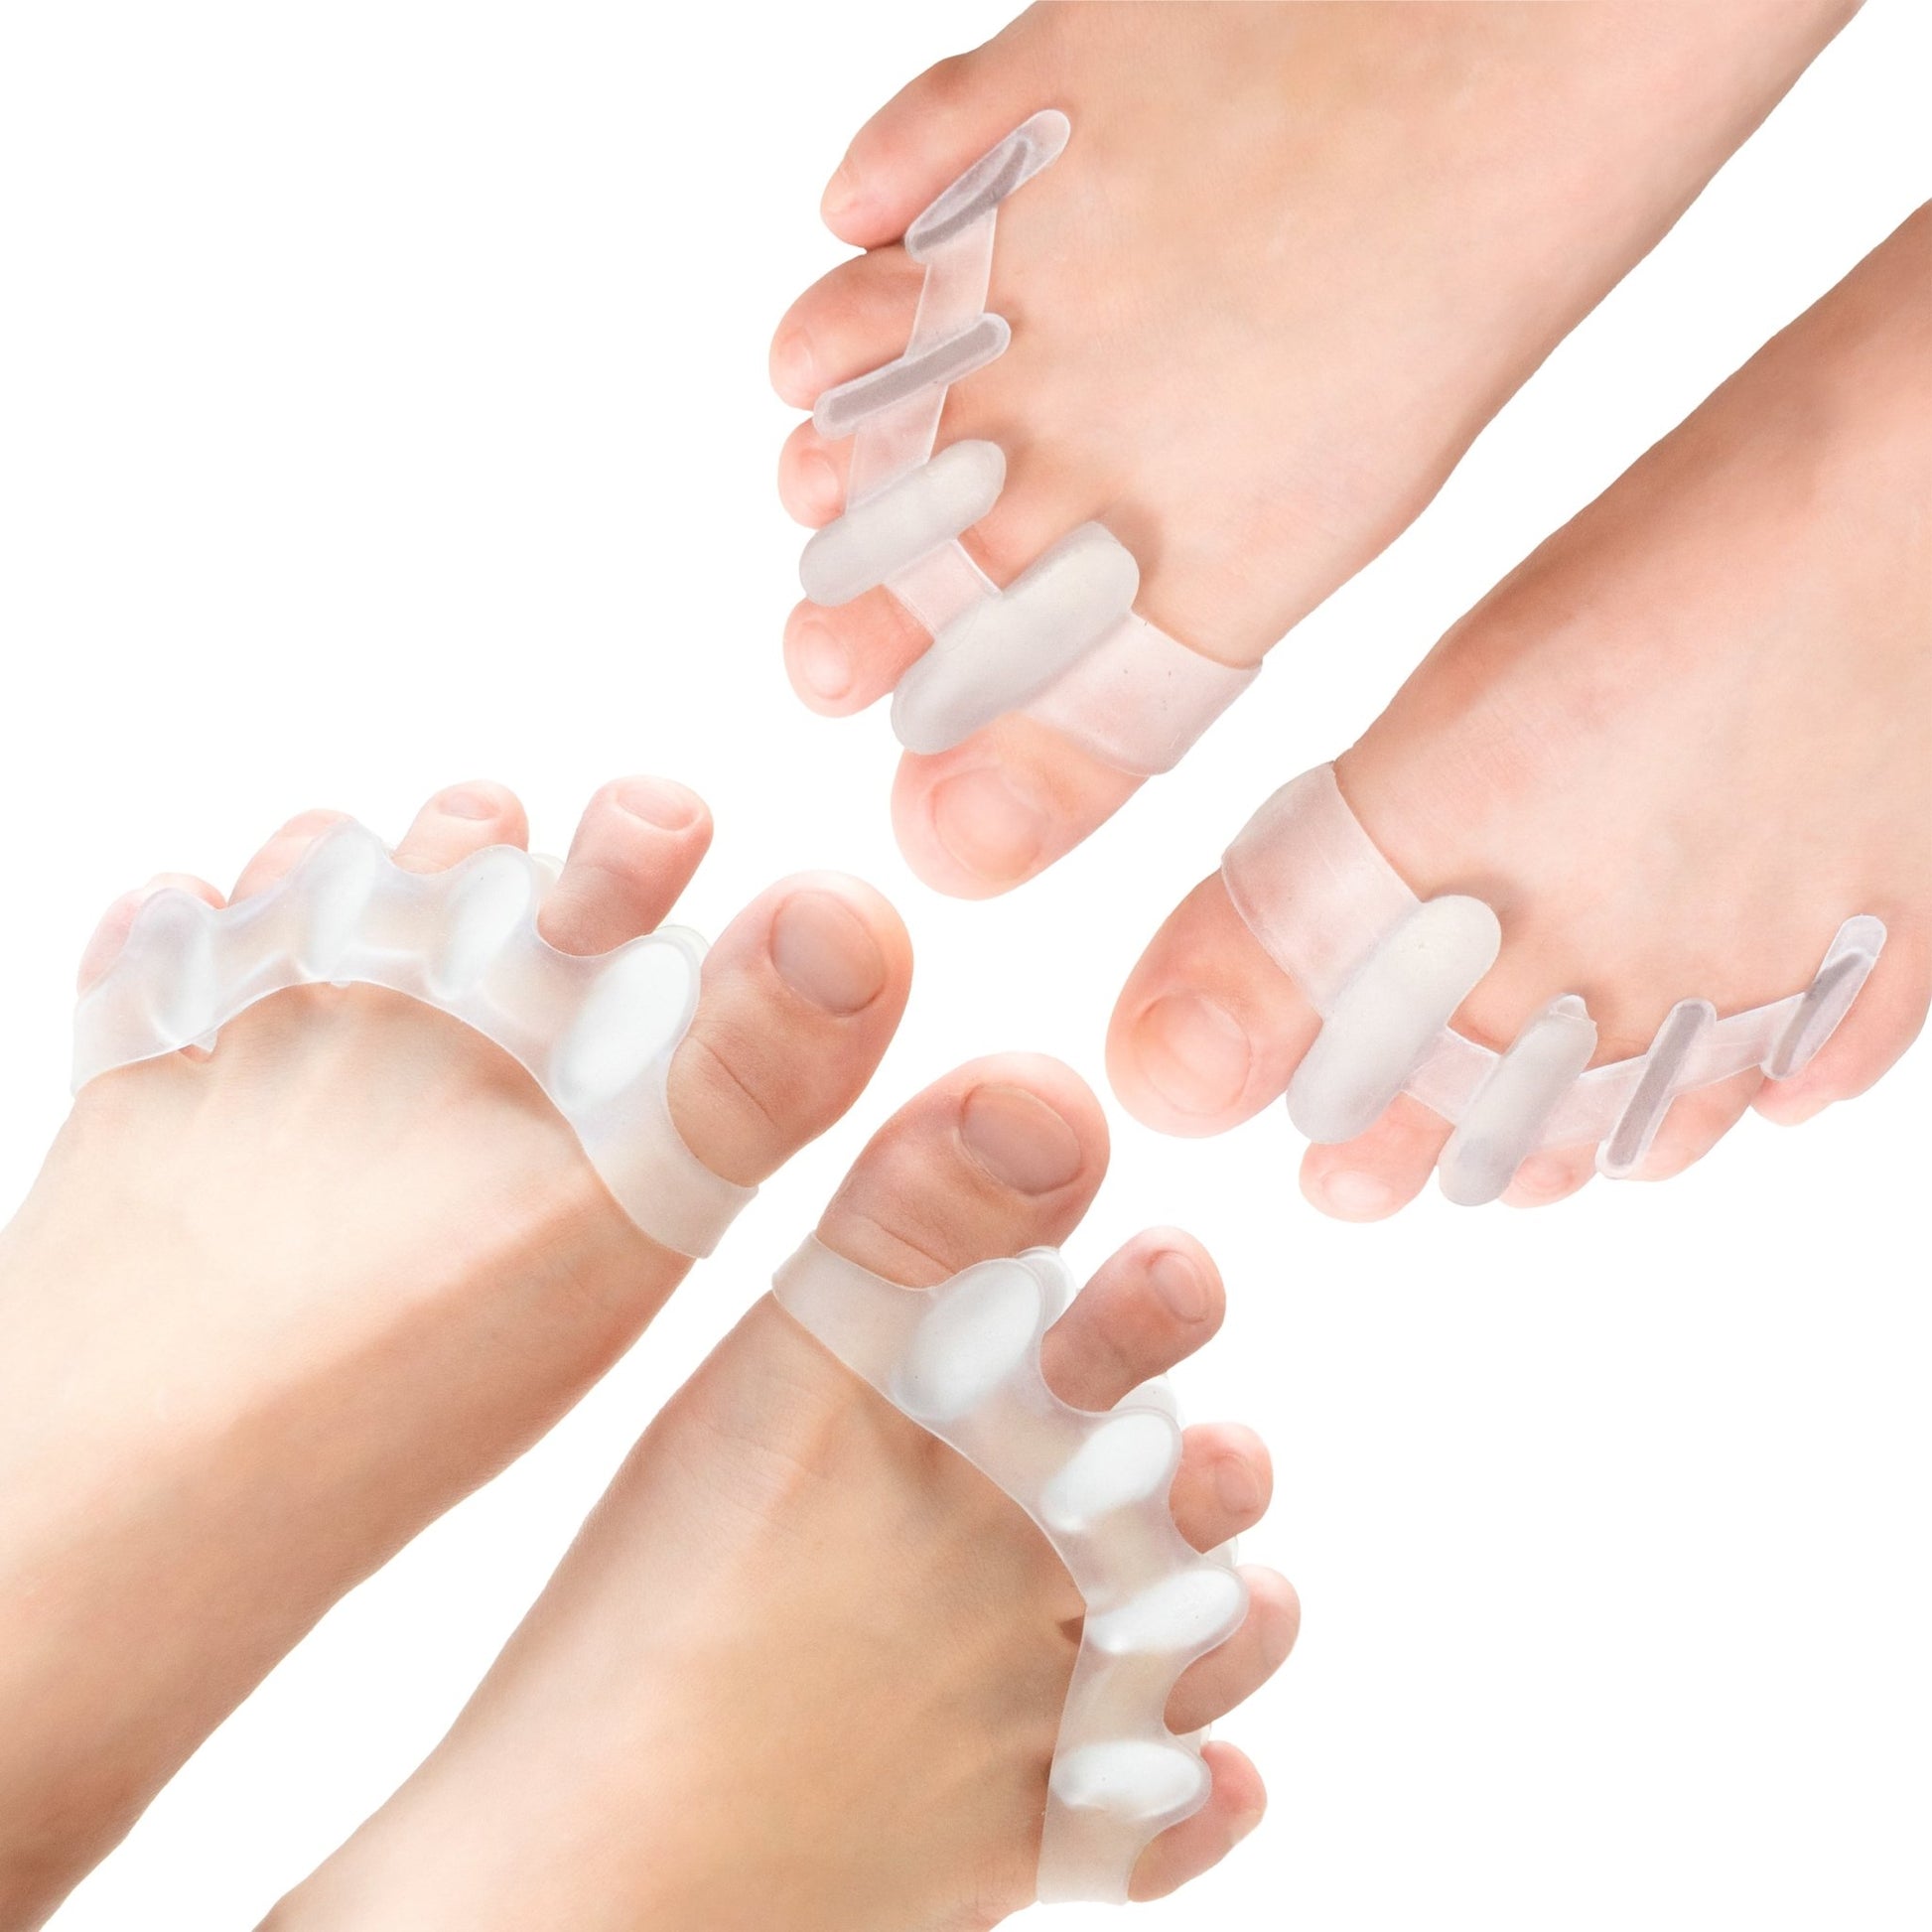 Flexible Silicone Toe Spacers - Spread Your Toes, Strengthen Your